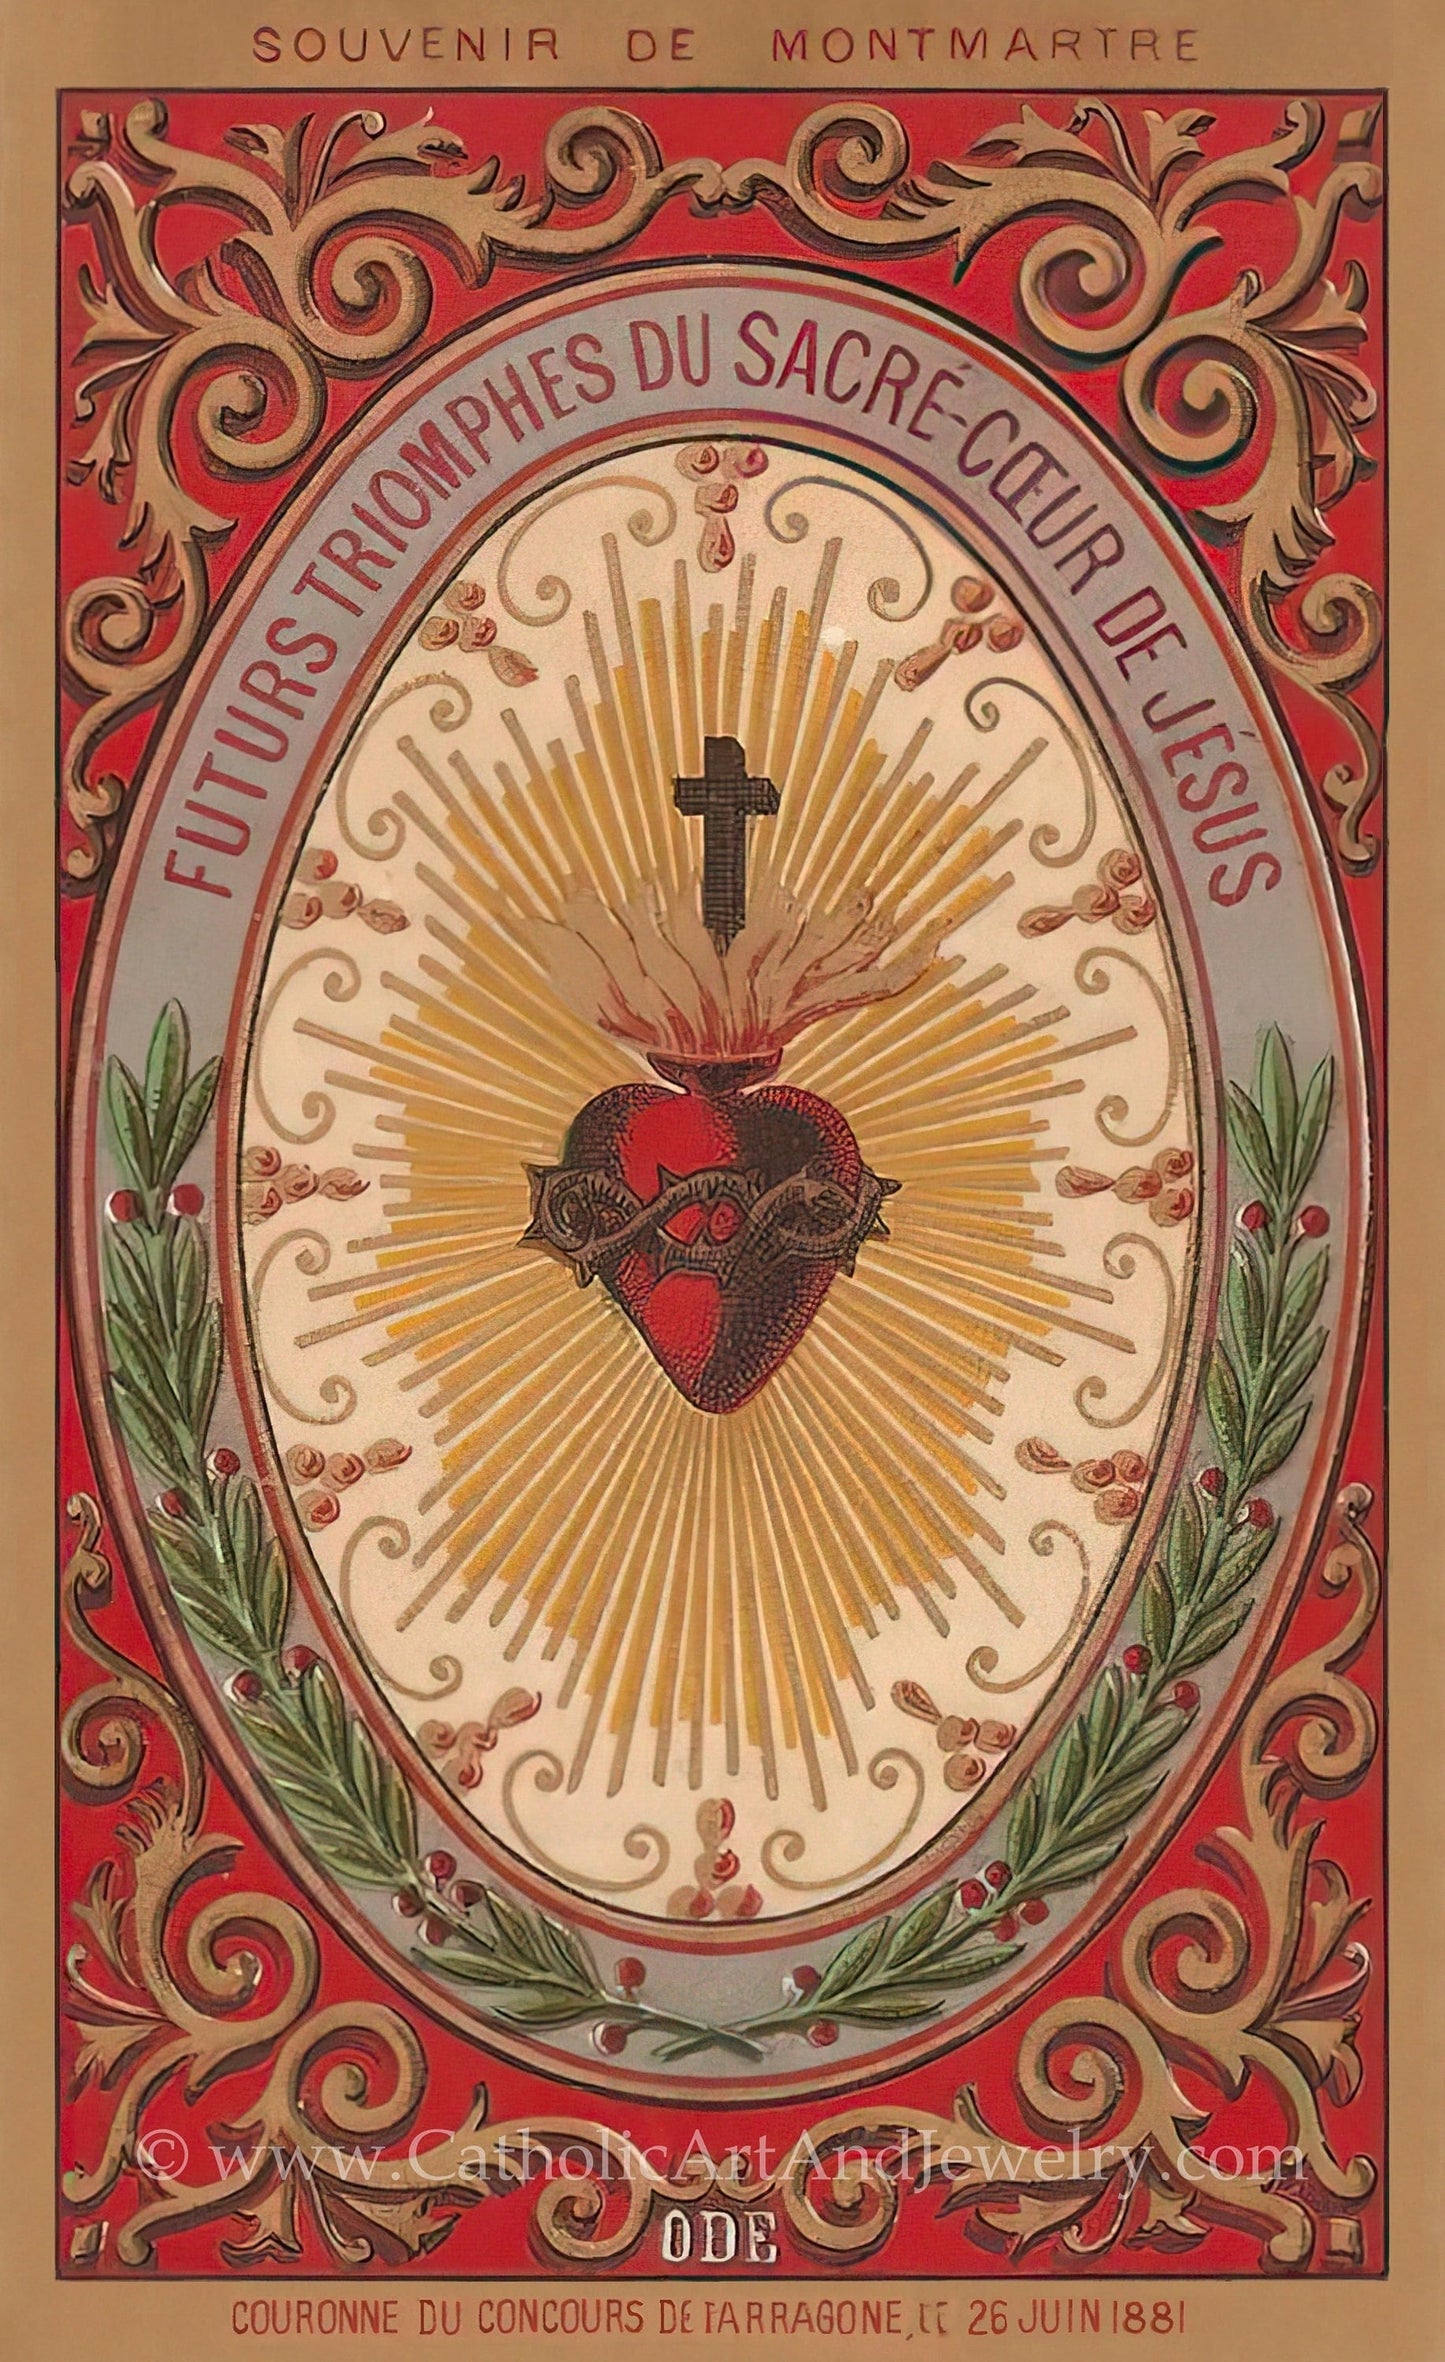 Future Triumphs of the Sacred Heart – based on a Vintage French Holy Card – Catholic Art Print